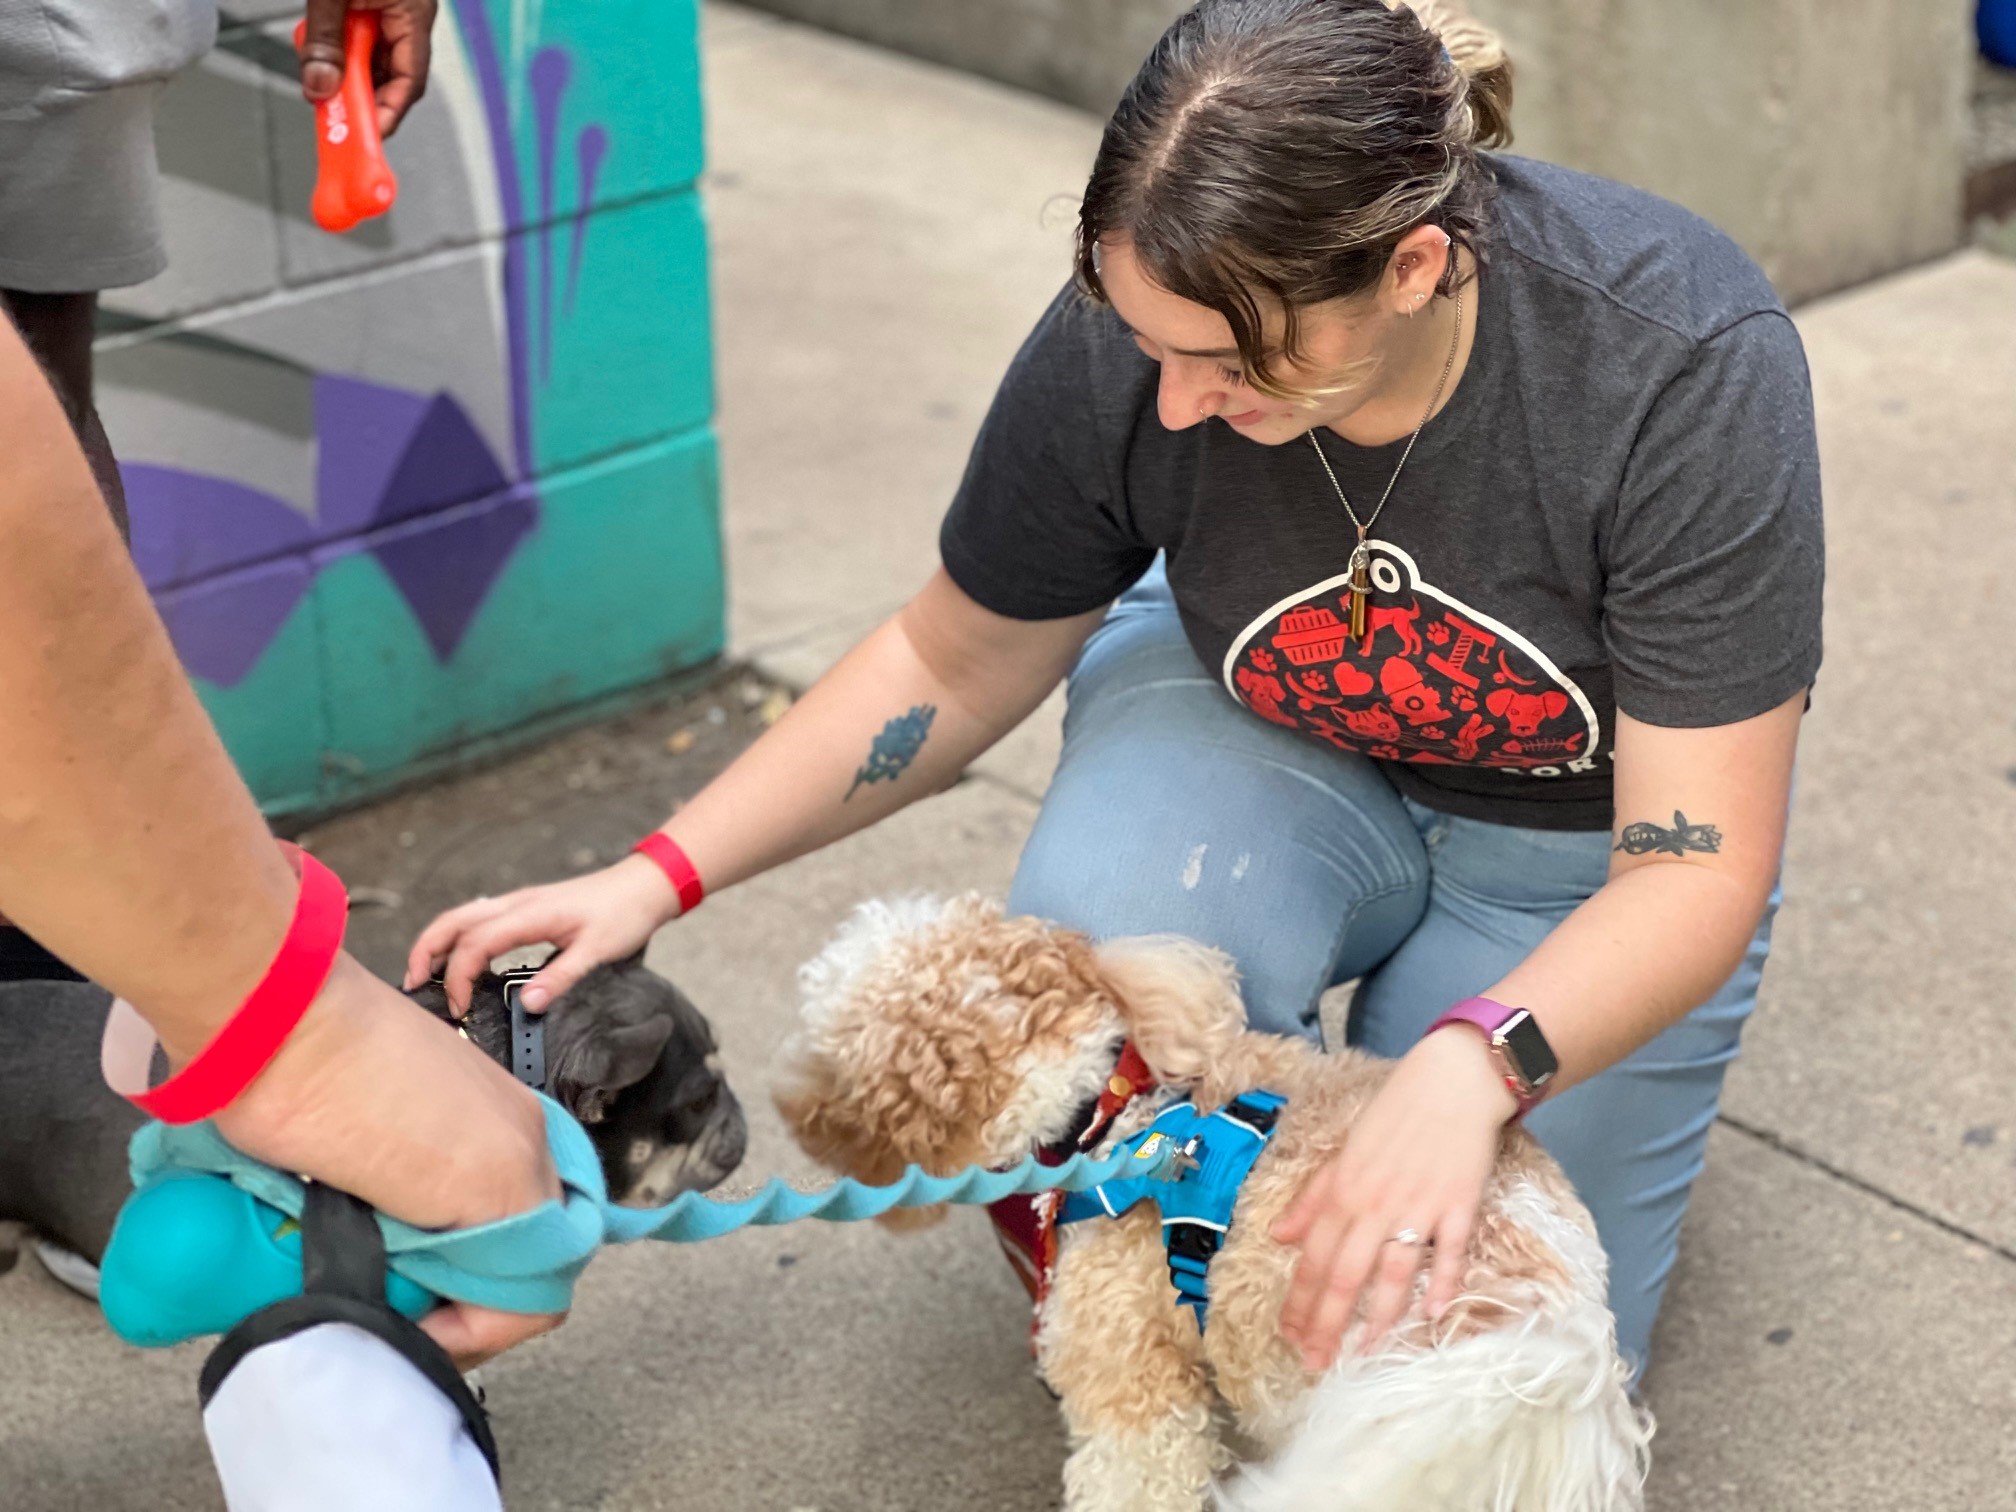 10th Annual Austin Humane Society Pup Crawl: Team members and their pups gathered to enjoy a drink (or two) along Rainey Street in support of the Austin Humane Society.